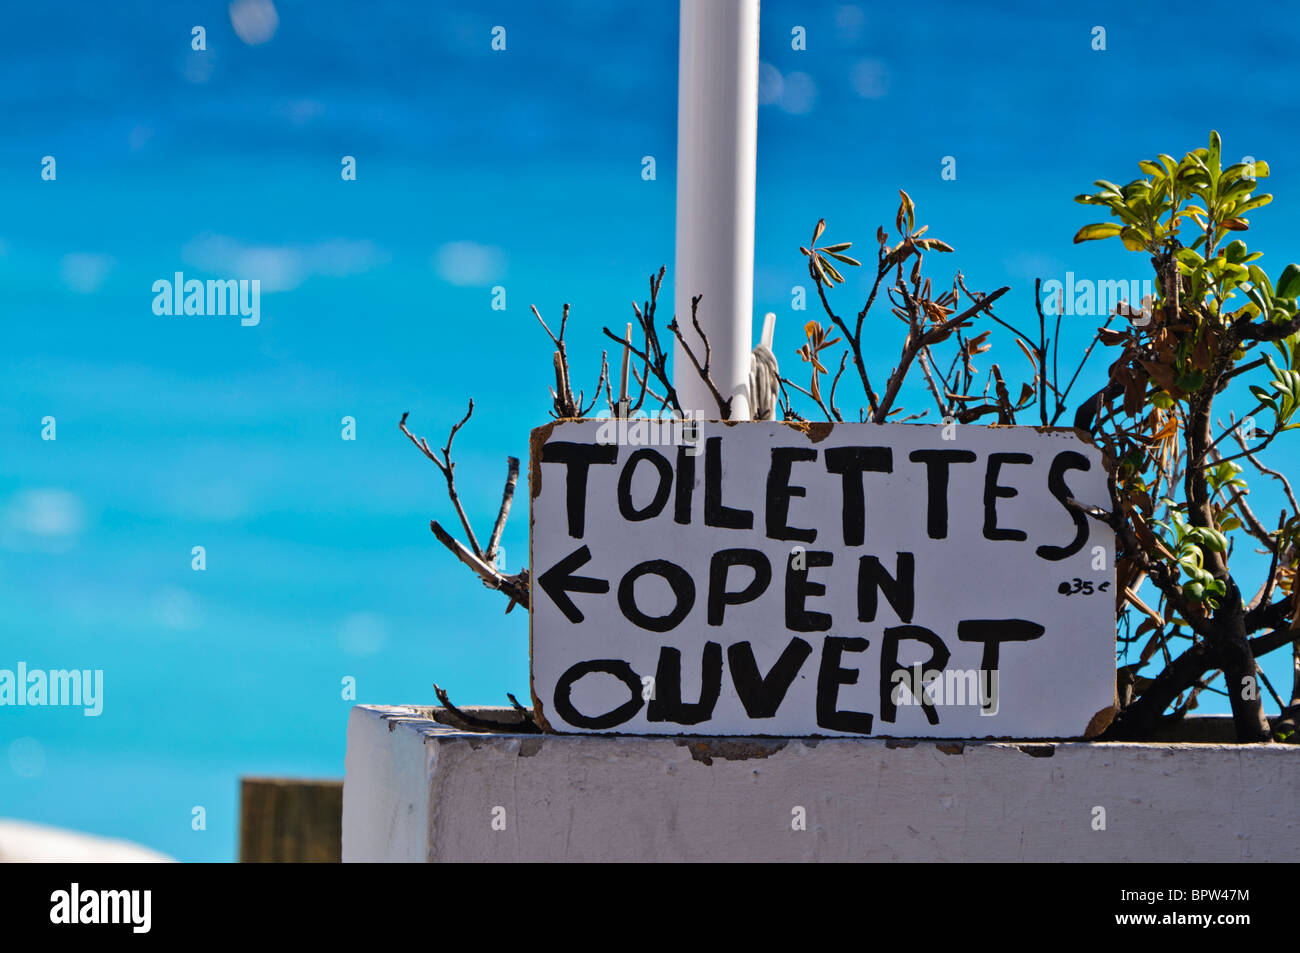 Sign indicating that seaside toilets are open in French and English: 'Toilettes open ouvert' Stock Photo